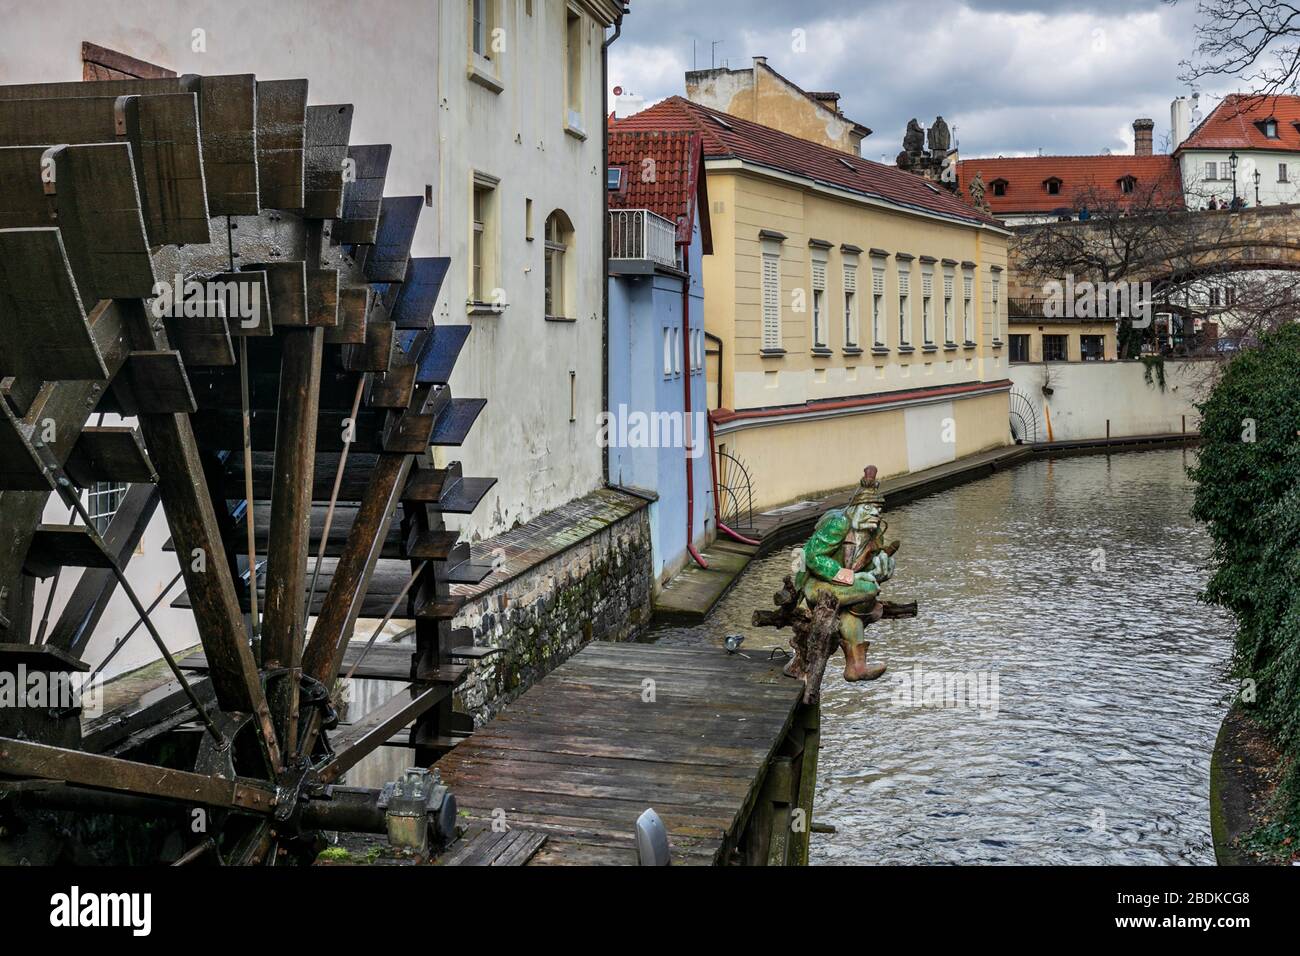 Statue of a Water sprite, a popular supernatural being from Czech and Slavic fairytales, Grand priory Water Mill on the Čertovka, Kampa Island, Prague Stock Photo